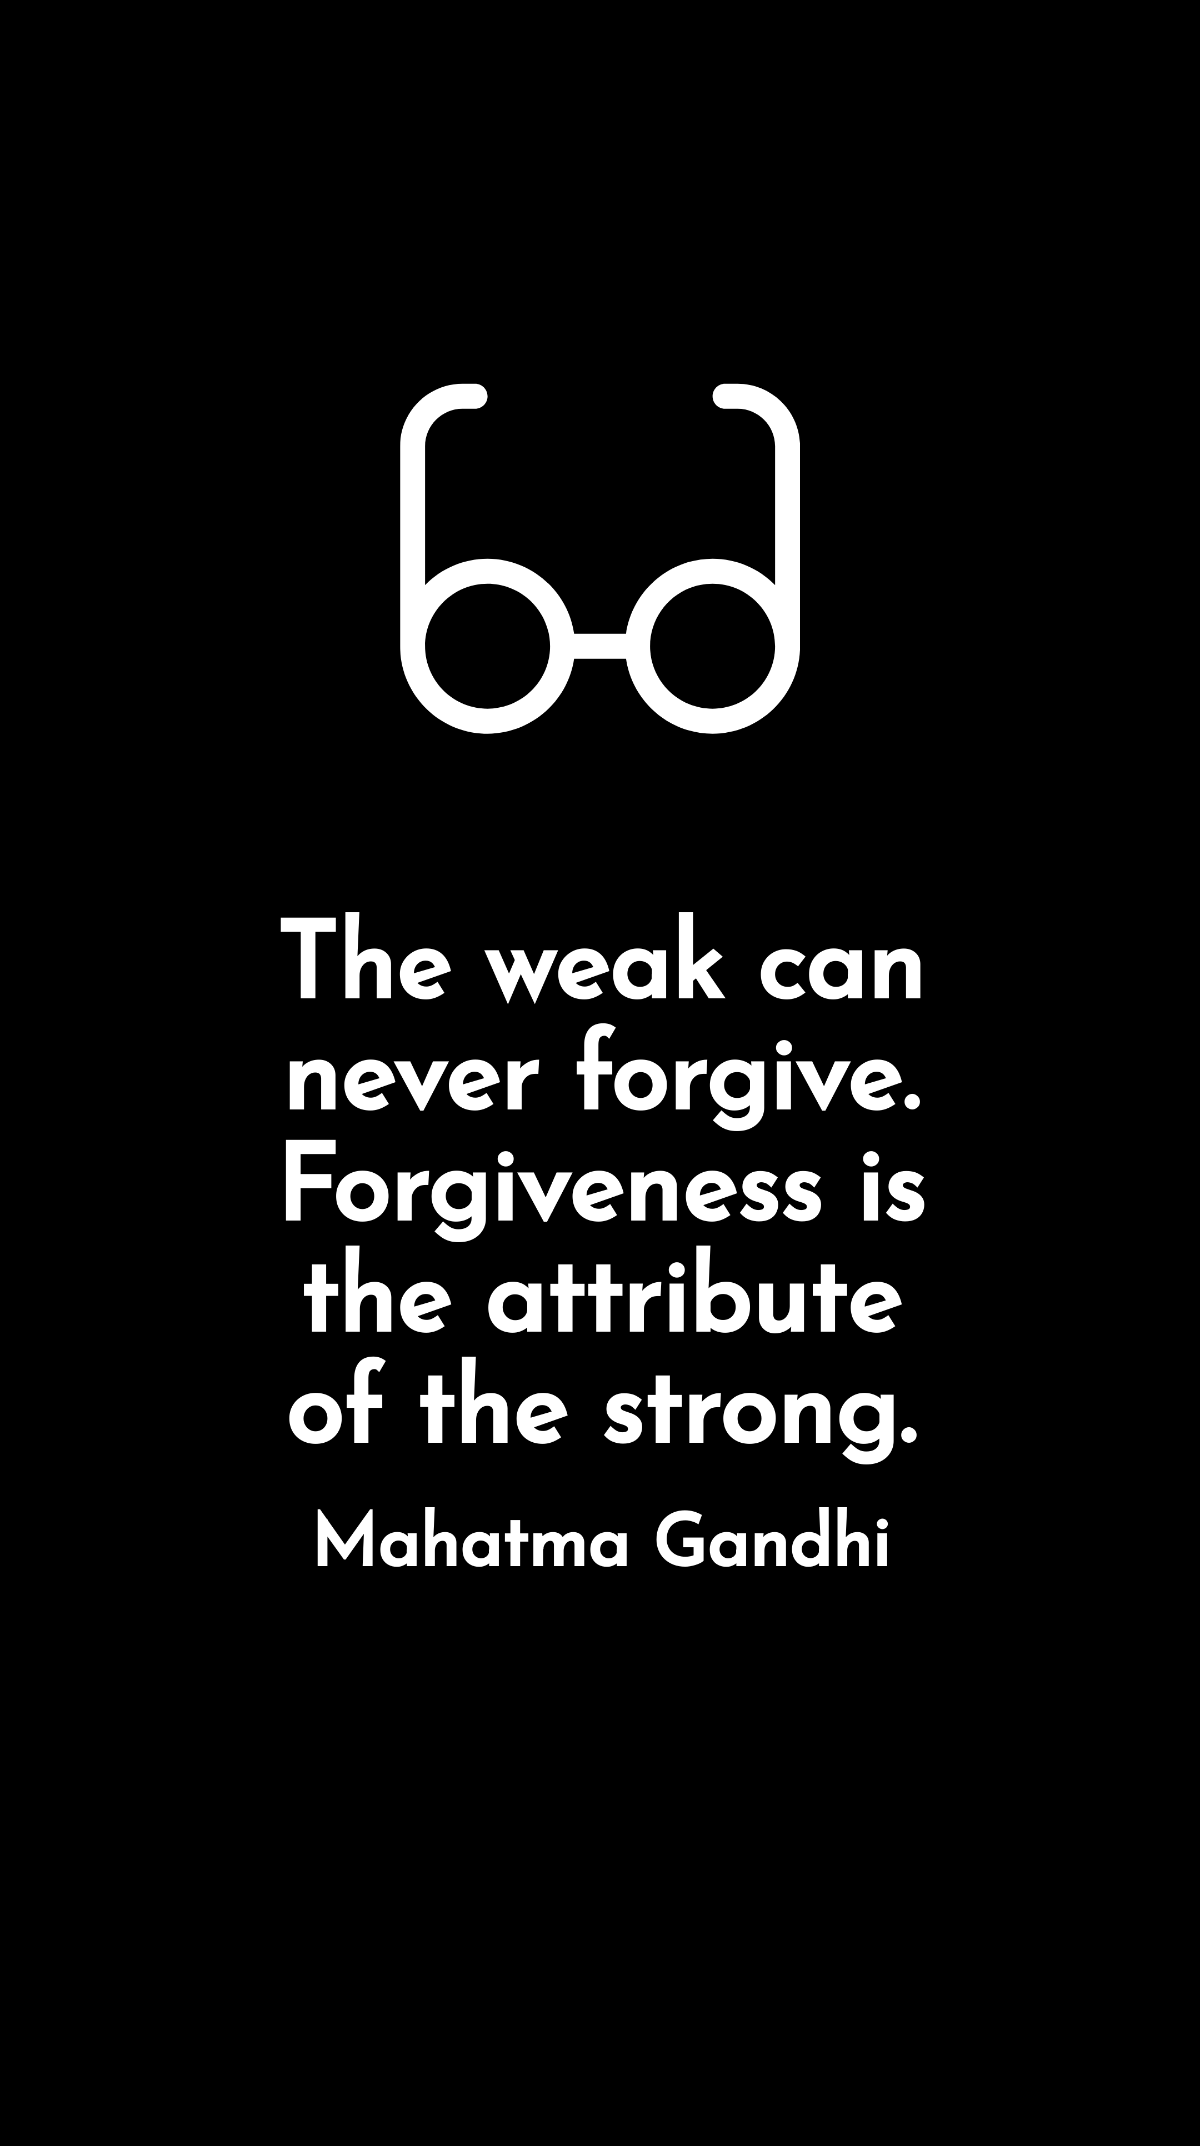 Free Mahatma Gandhi - The weak can never forgive. Forgiveness is the attribute of the strong. Template